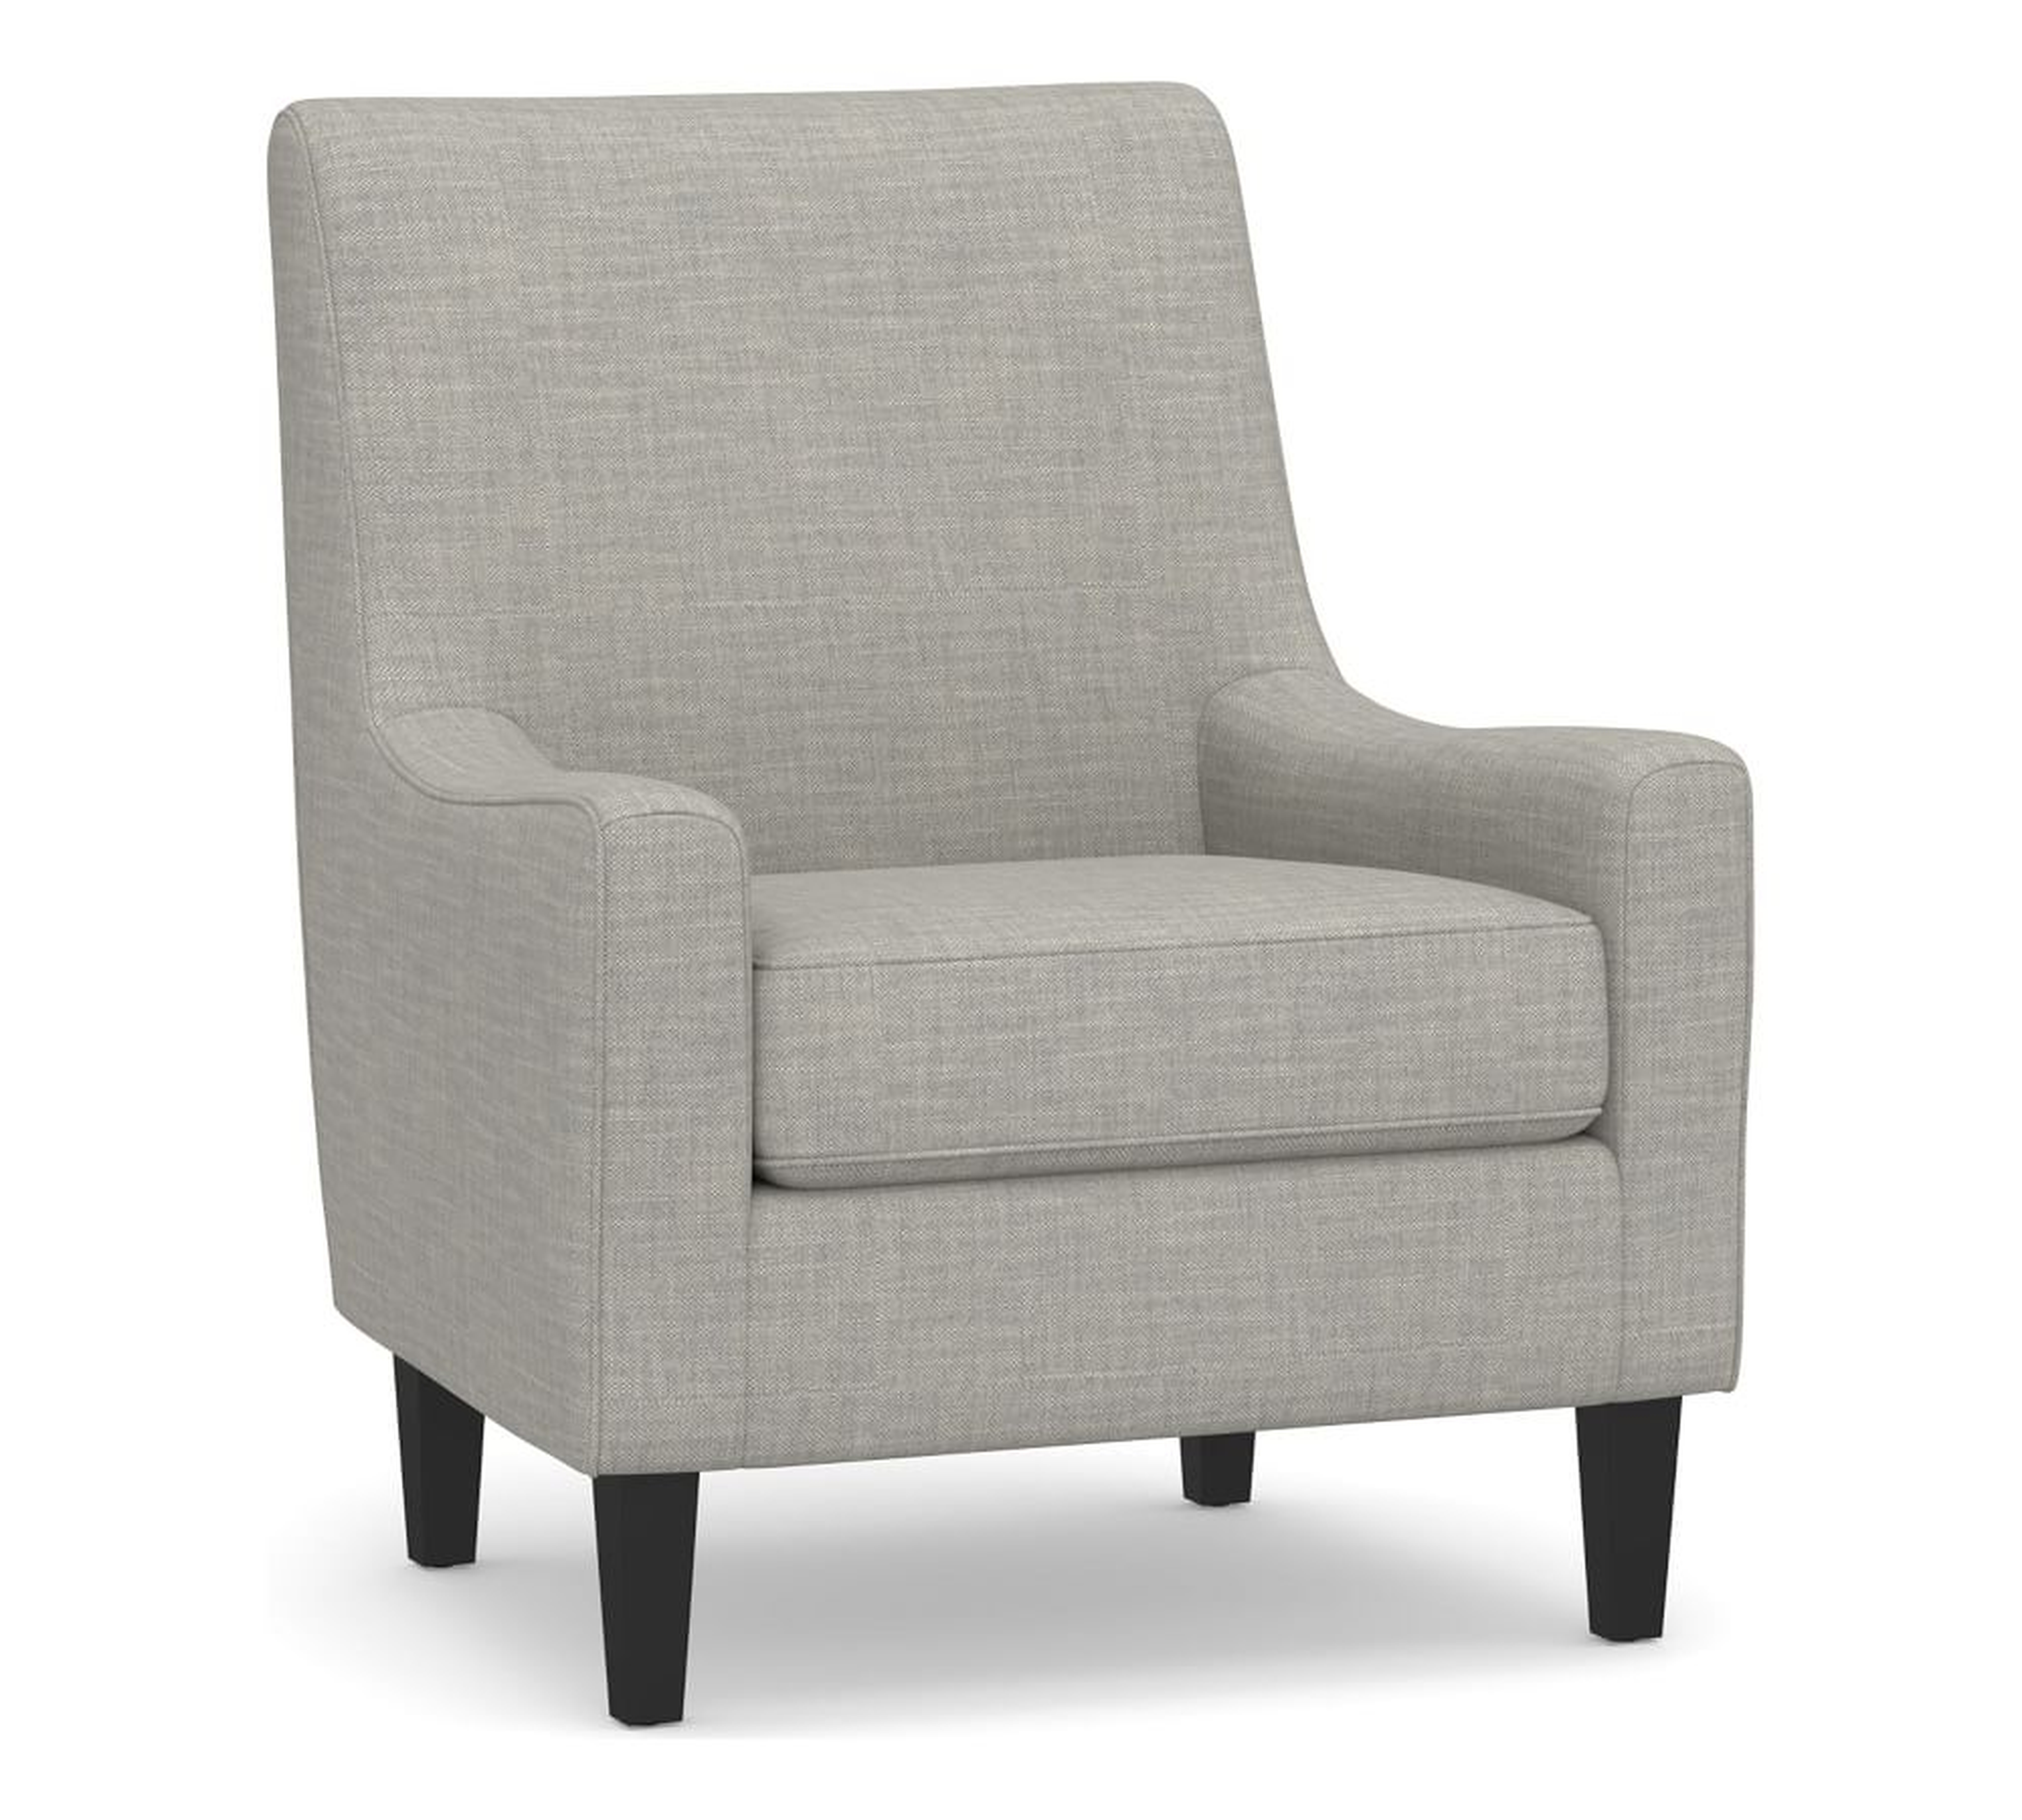 SoMa Isaac Upholstered Armchair, Polyester Wrapped Cushions, Premium Performance Basketweave Light Gray - Pottery Barn